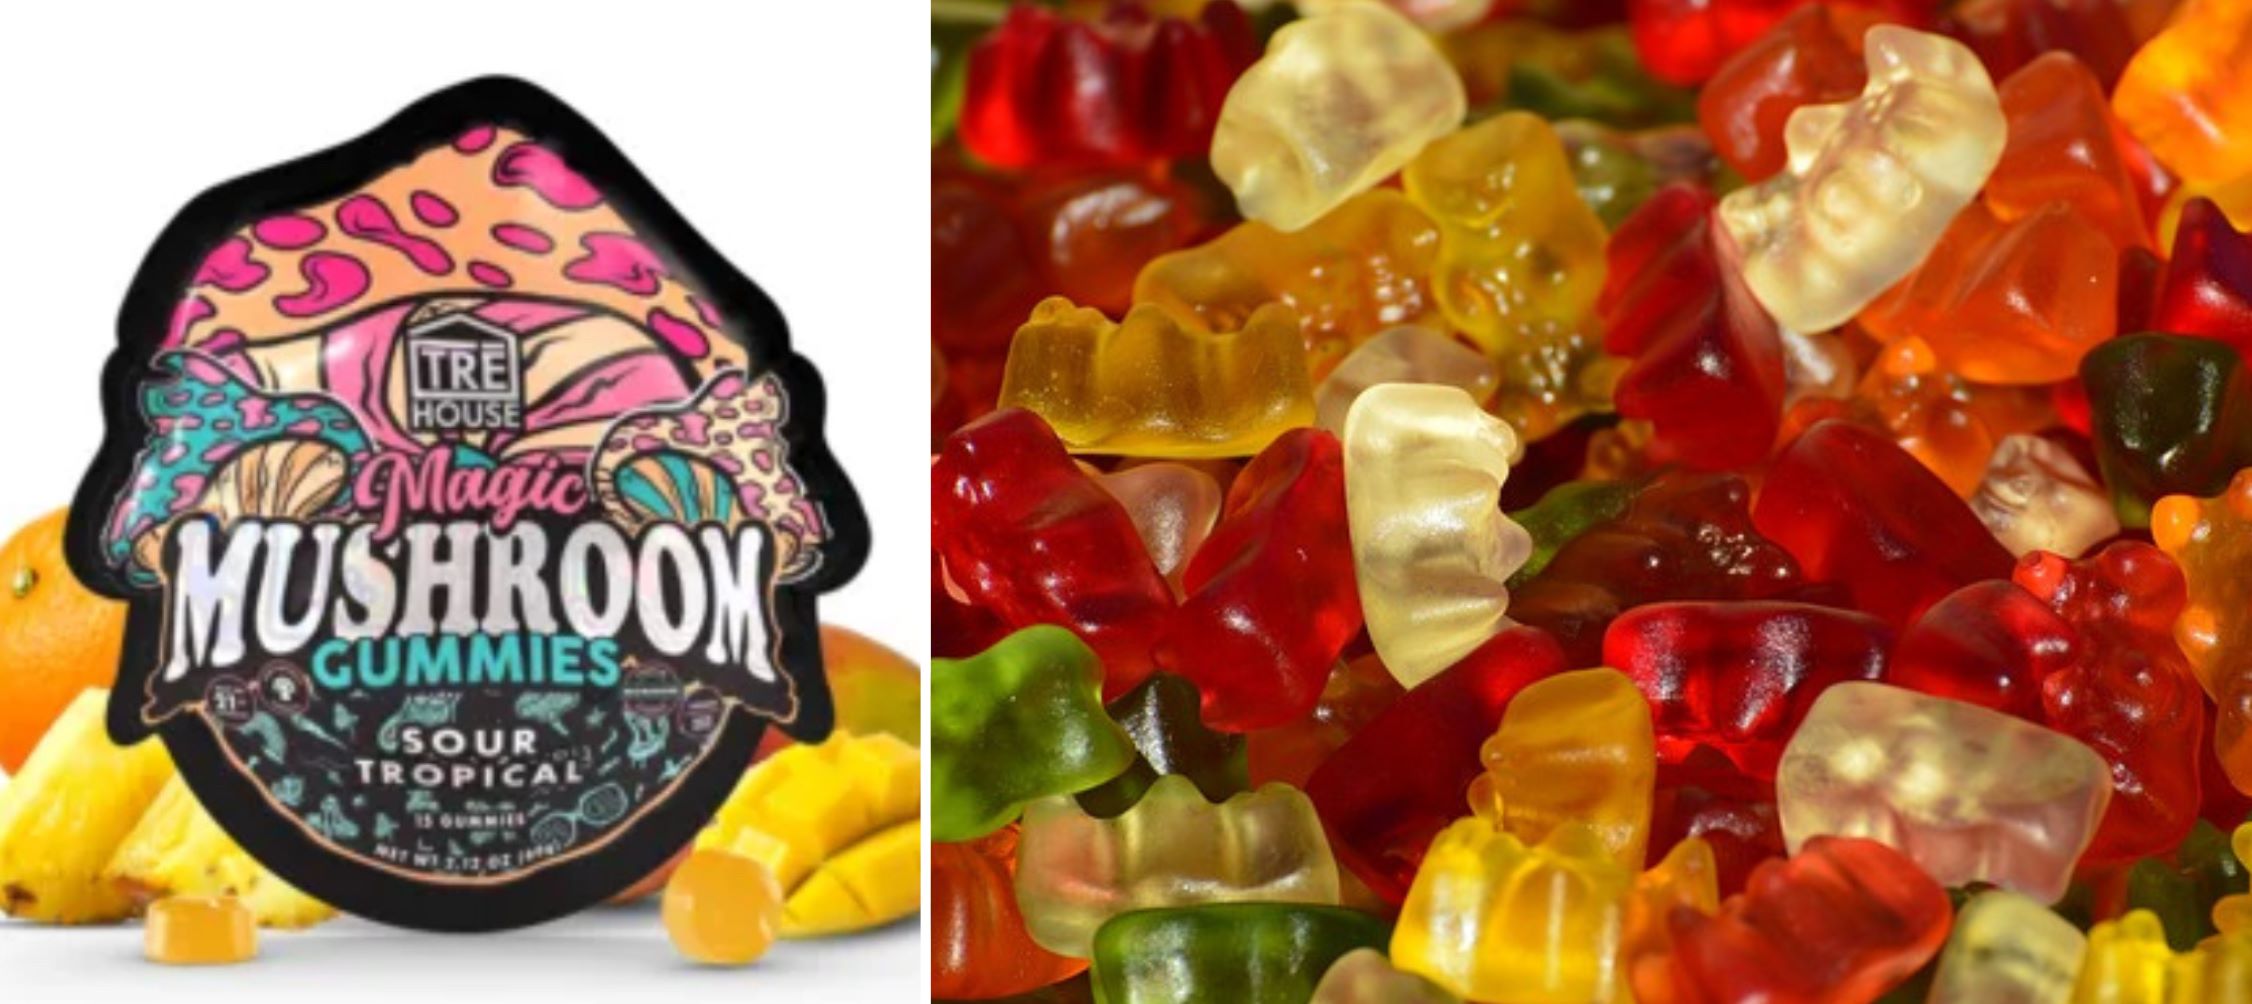 How Has Pop Culture Contributed To The Growth Of Mushroom Gummies?